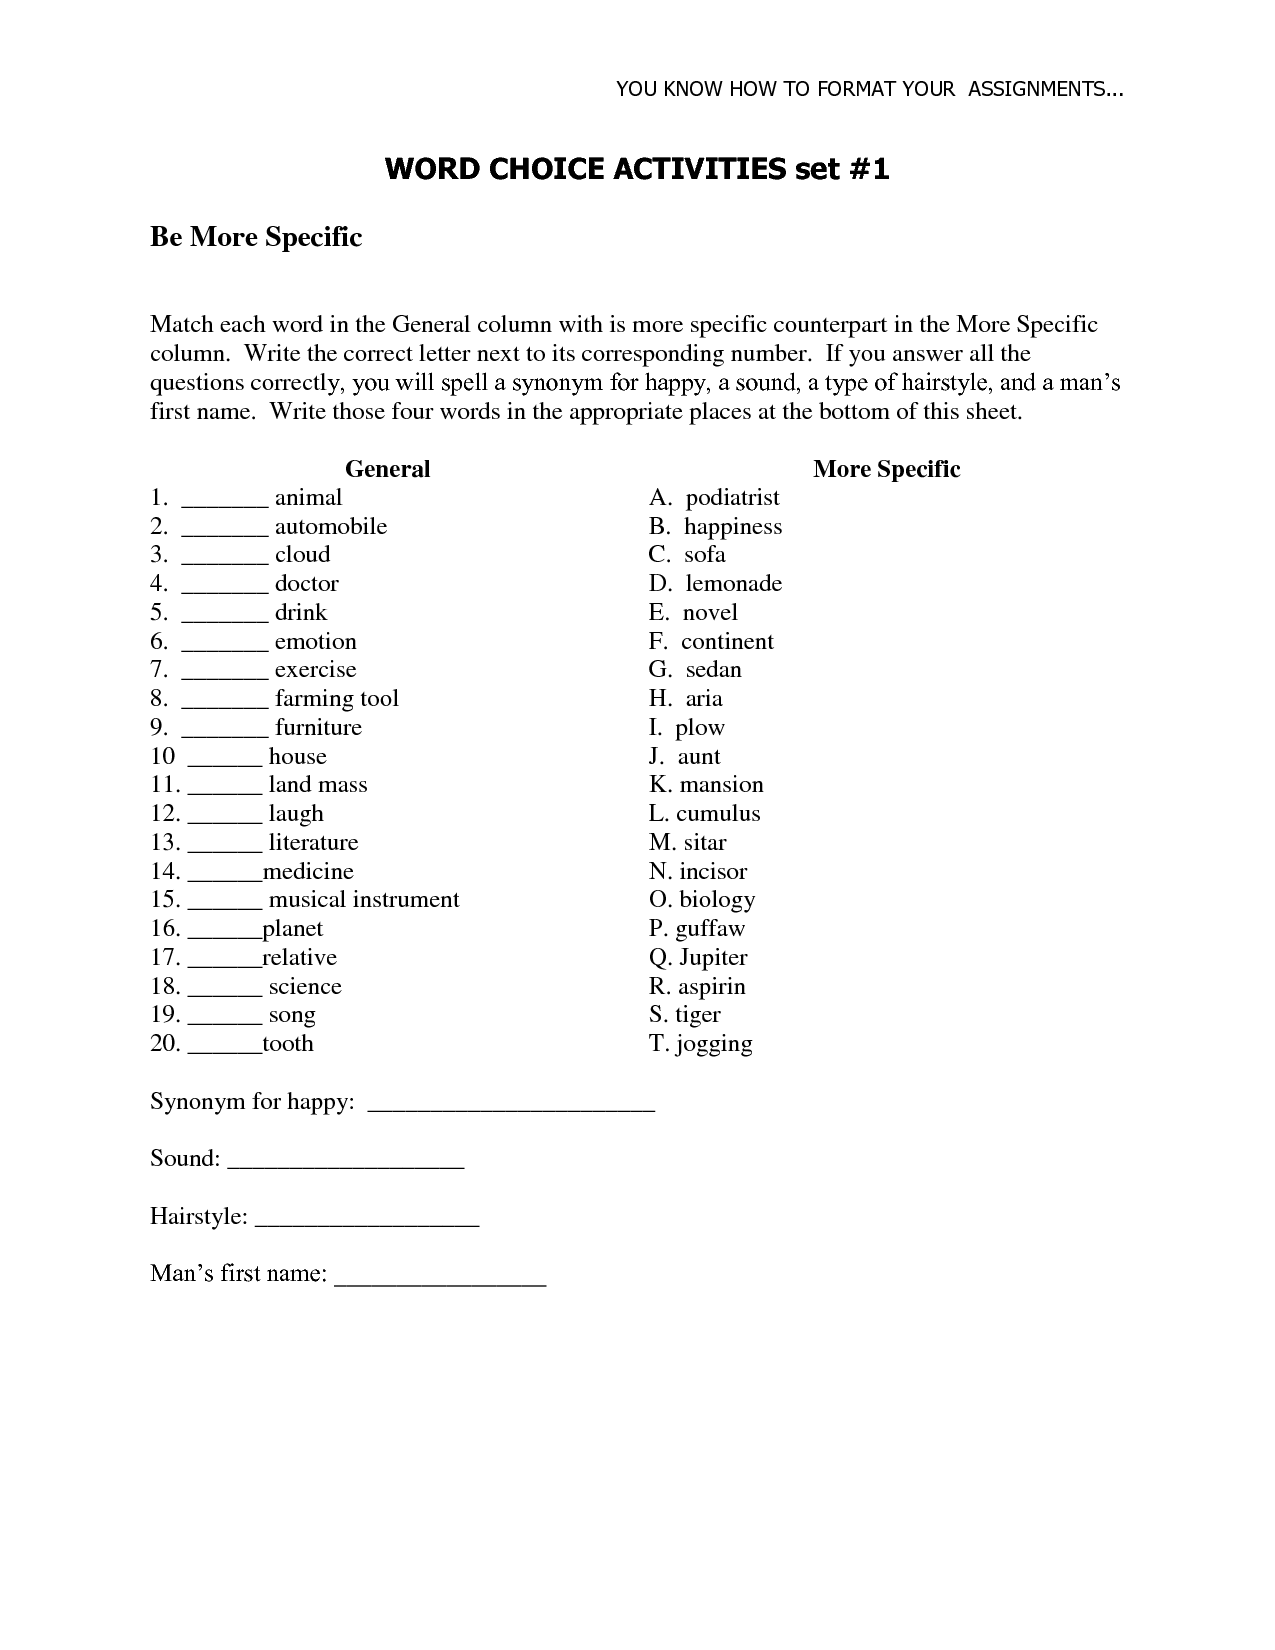 10 Best Images Of Word Choice Worksheets Word Choice Activity Worksheets Better Word Choice